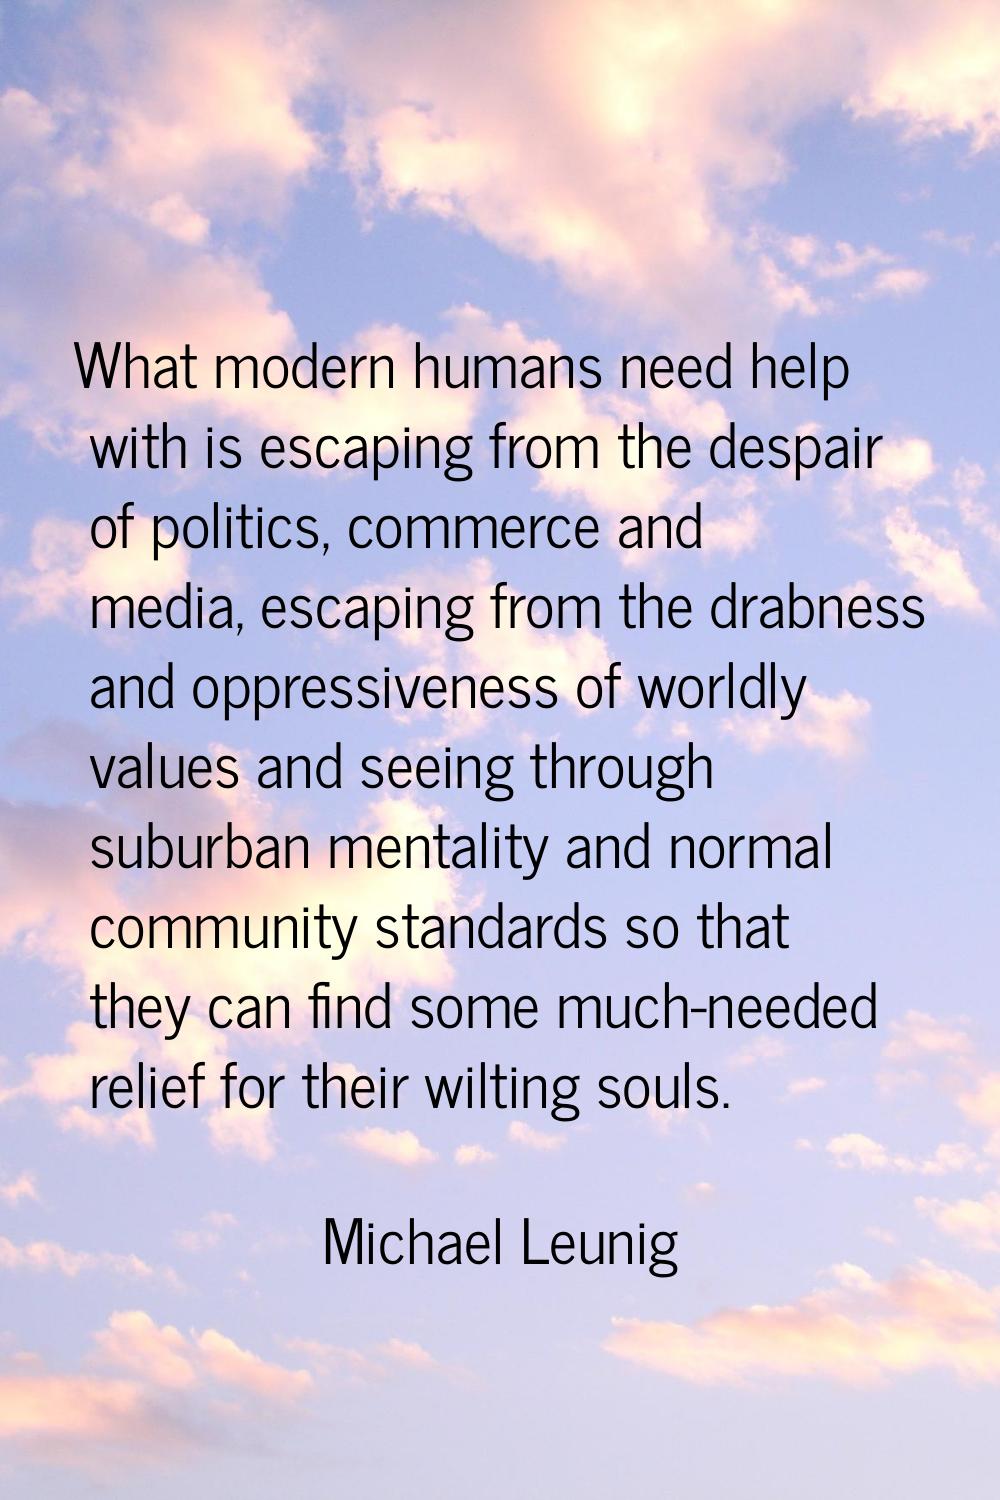 What modern humans need help with is escaping from the despair of politics, commerce and media, esc